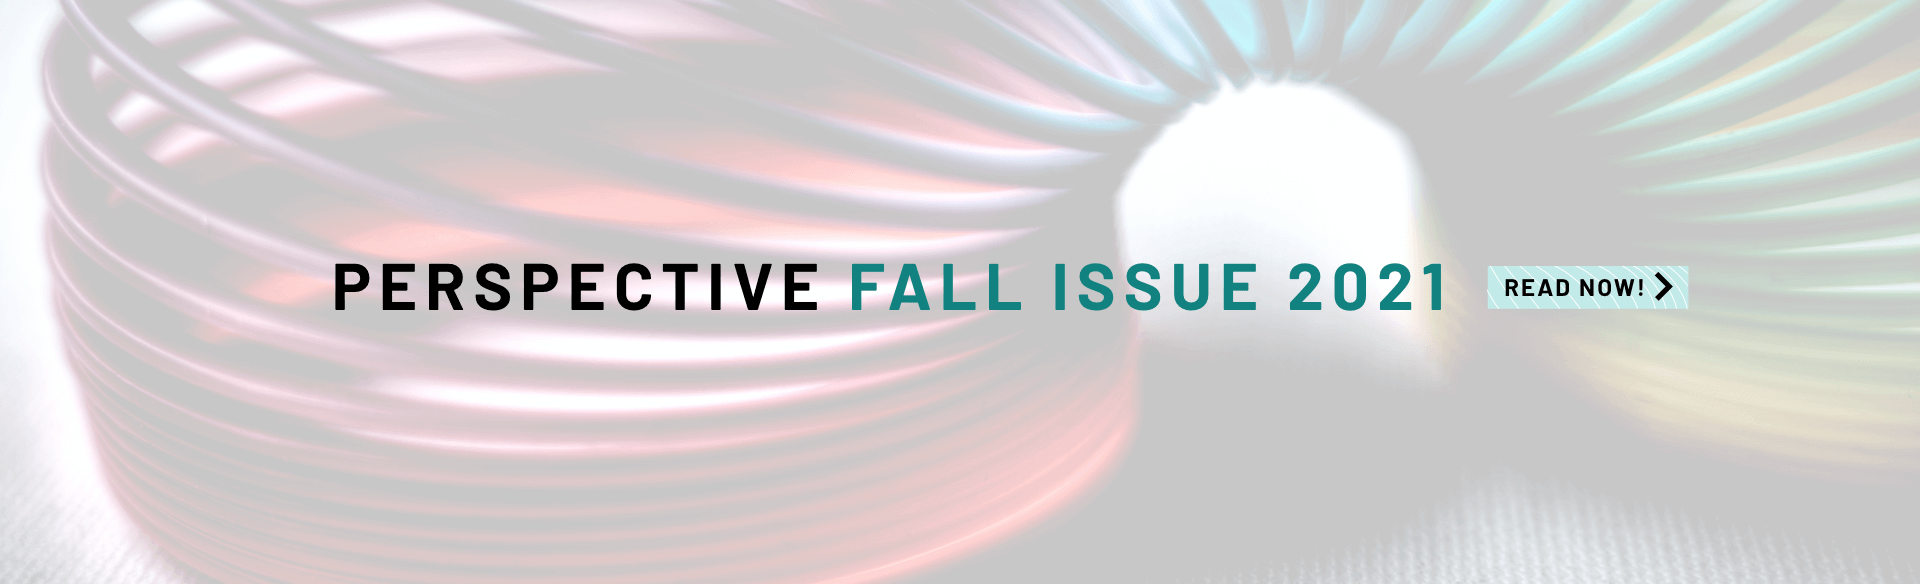 Perspective – Fall 2021 Issue